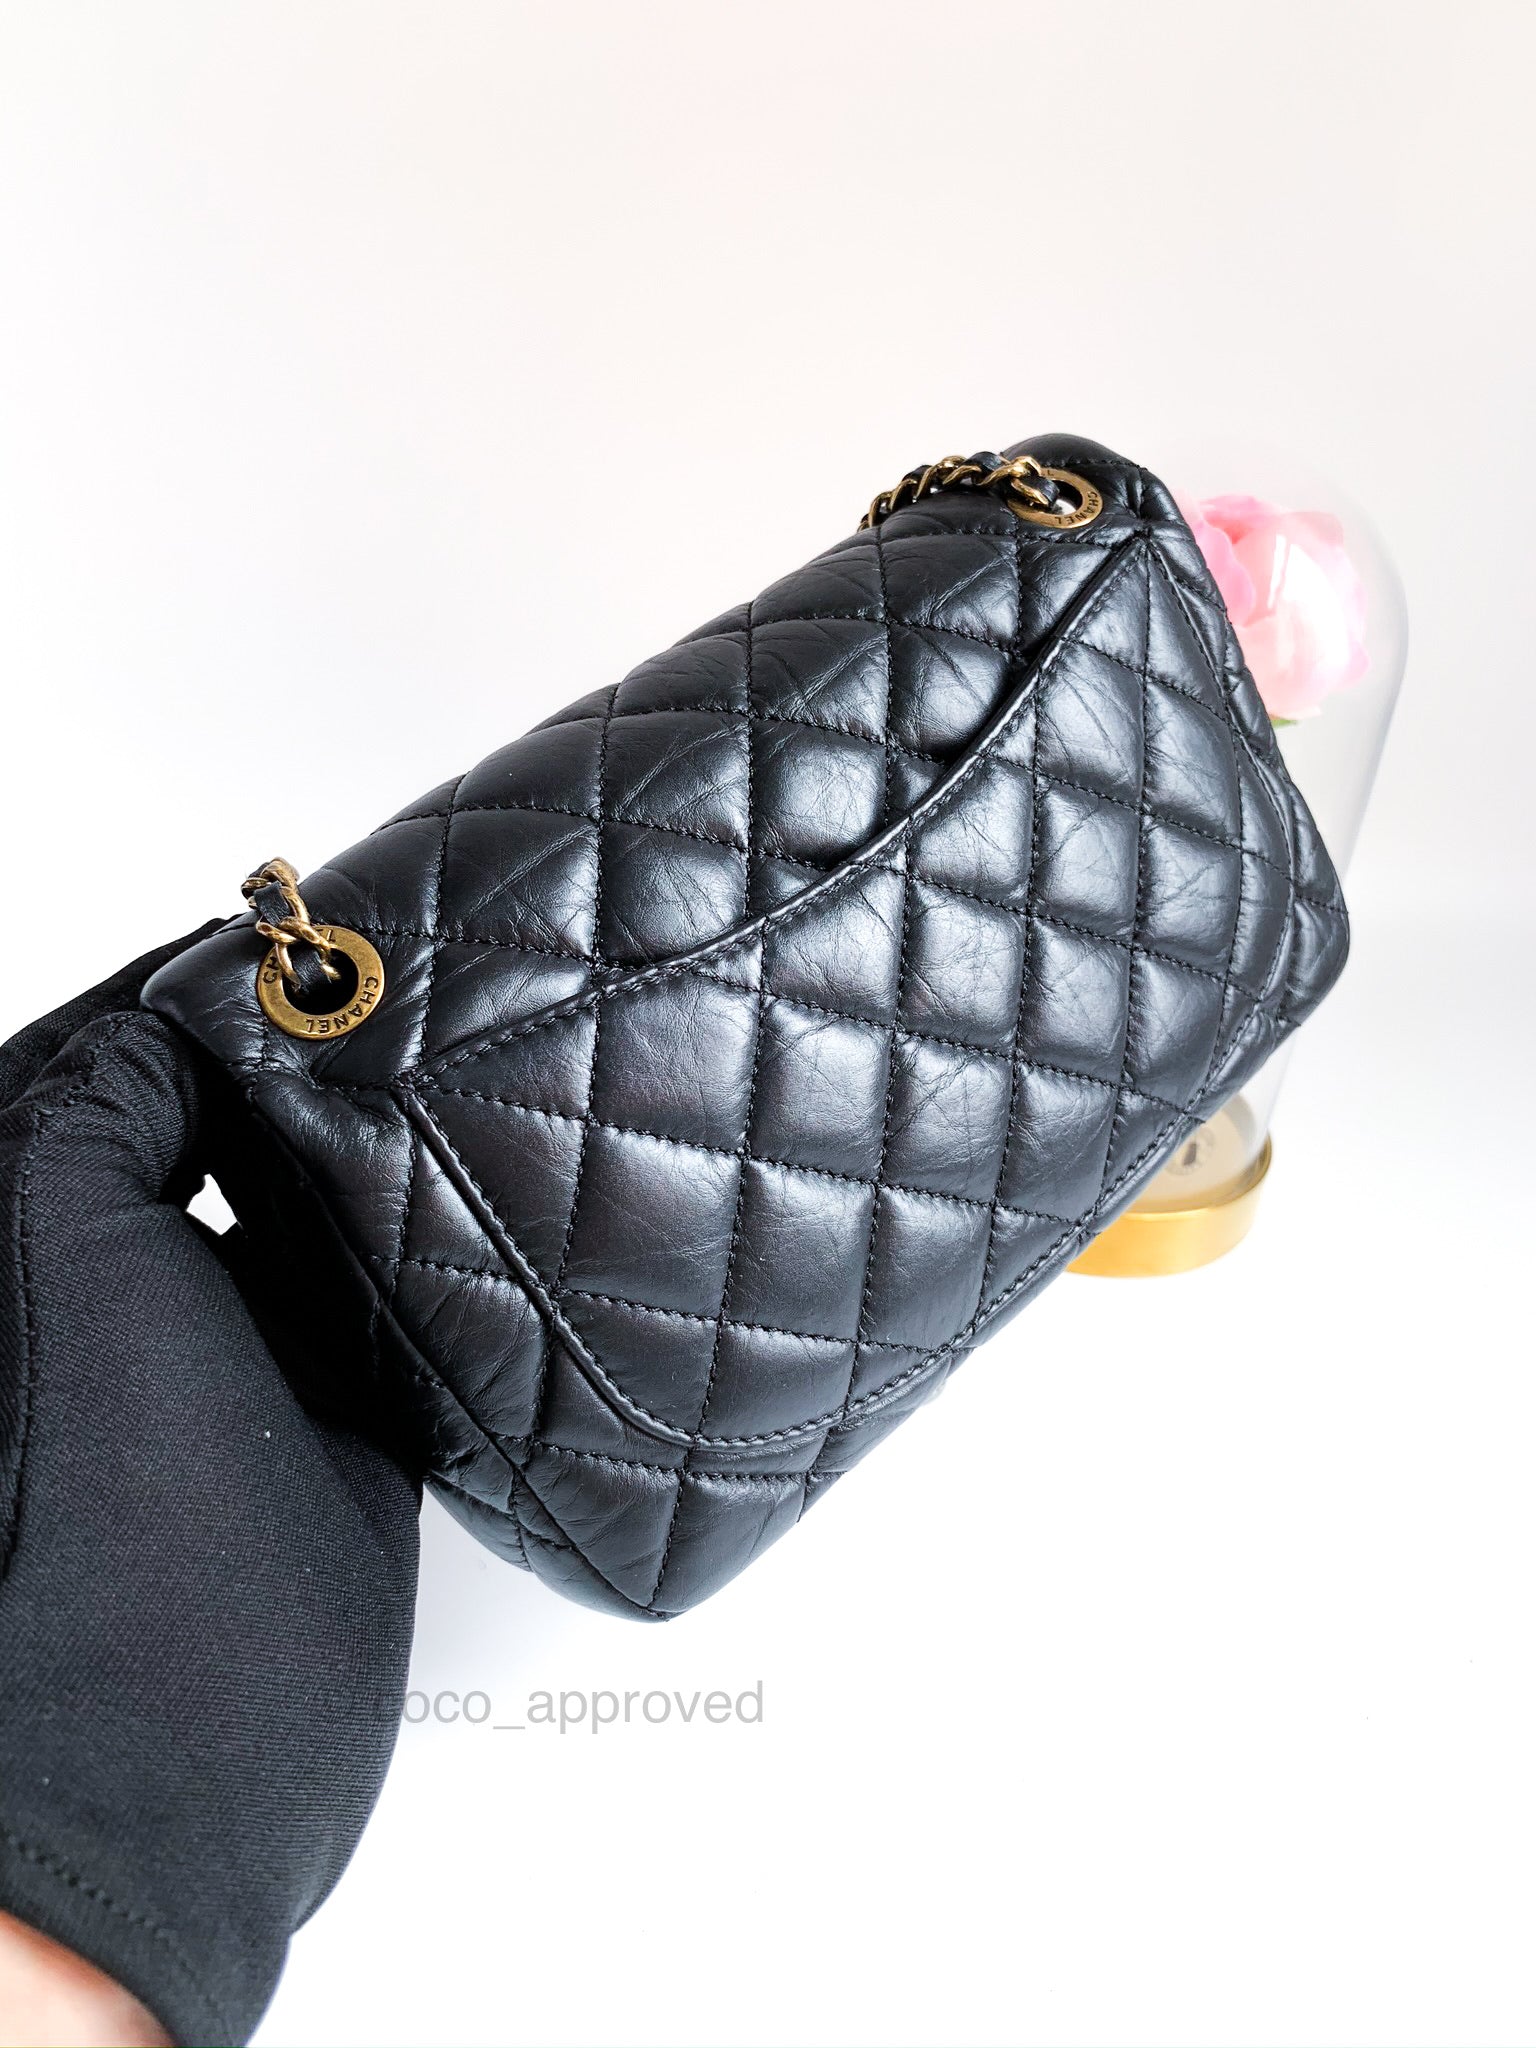 Crossbody bags Archives - Luxury consignment shop online Amsterdam